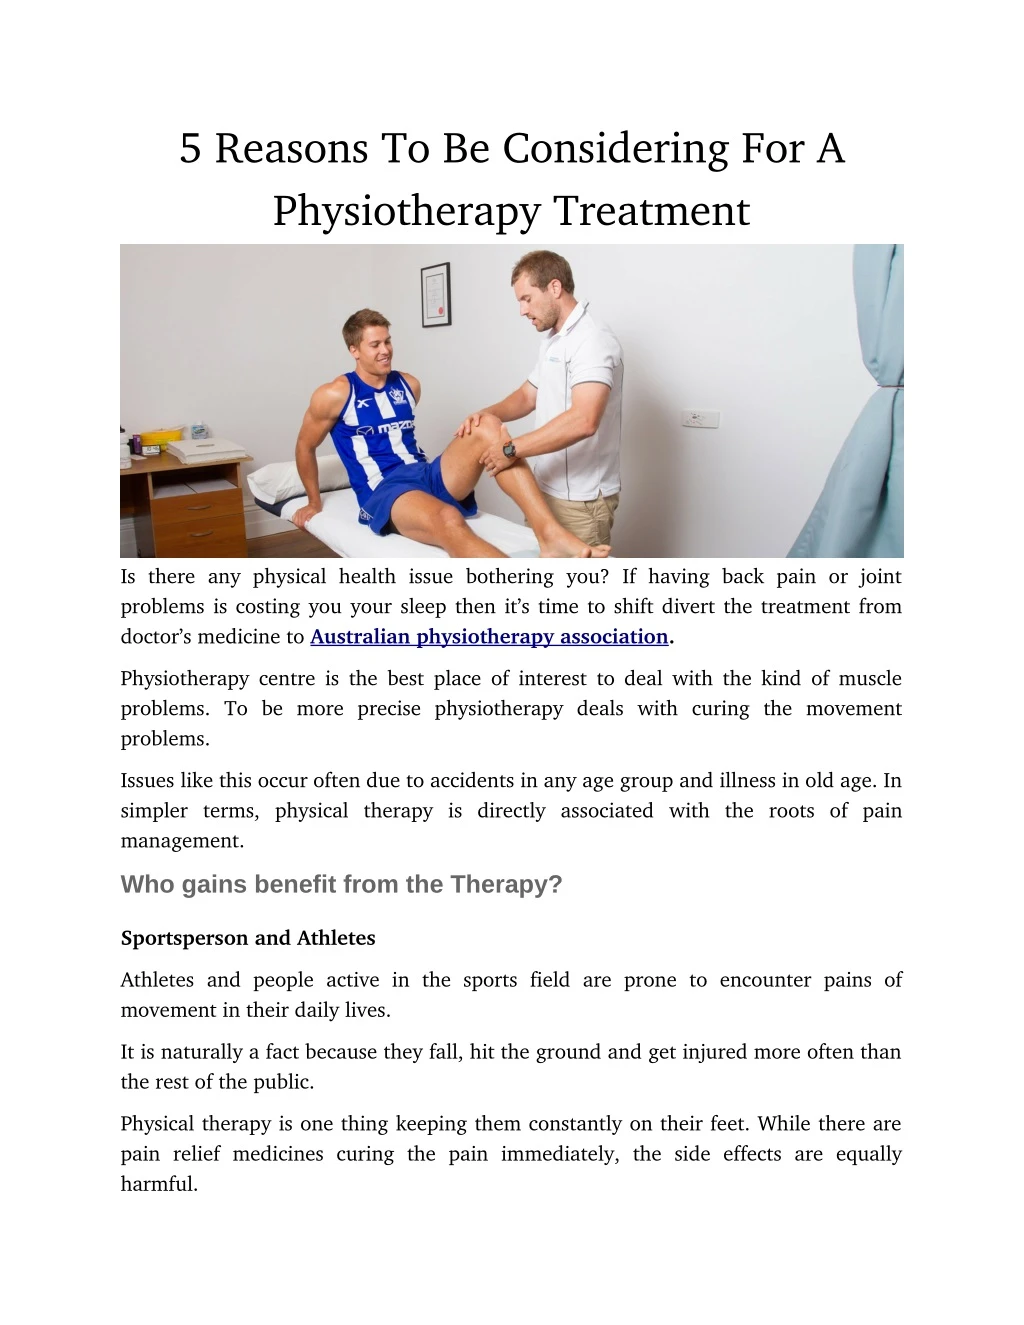 5 reasons to be considering for a physiotherapy